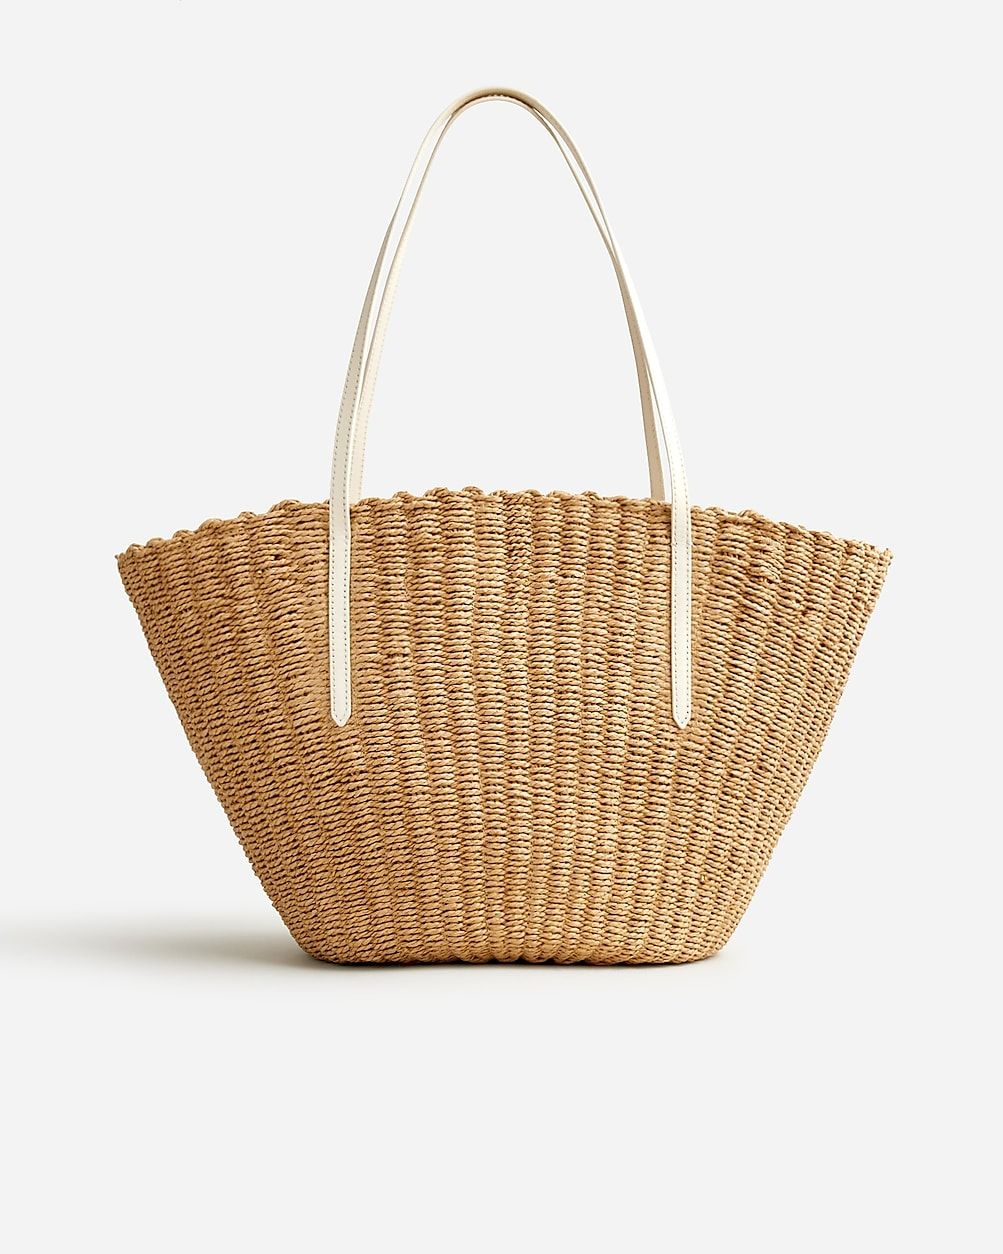 best sellerComo woven straw tote$118.00Select Colors$89.50Ivory$89.50One SizeSize & Fit Informati... | J.Crew US